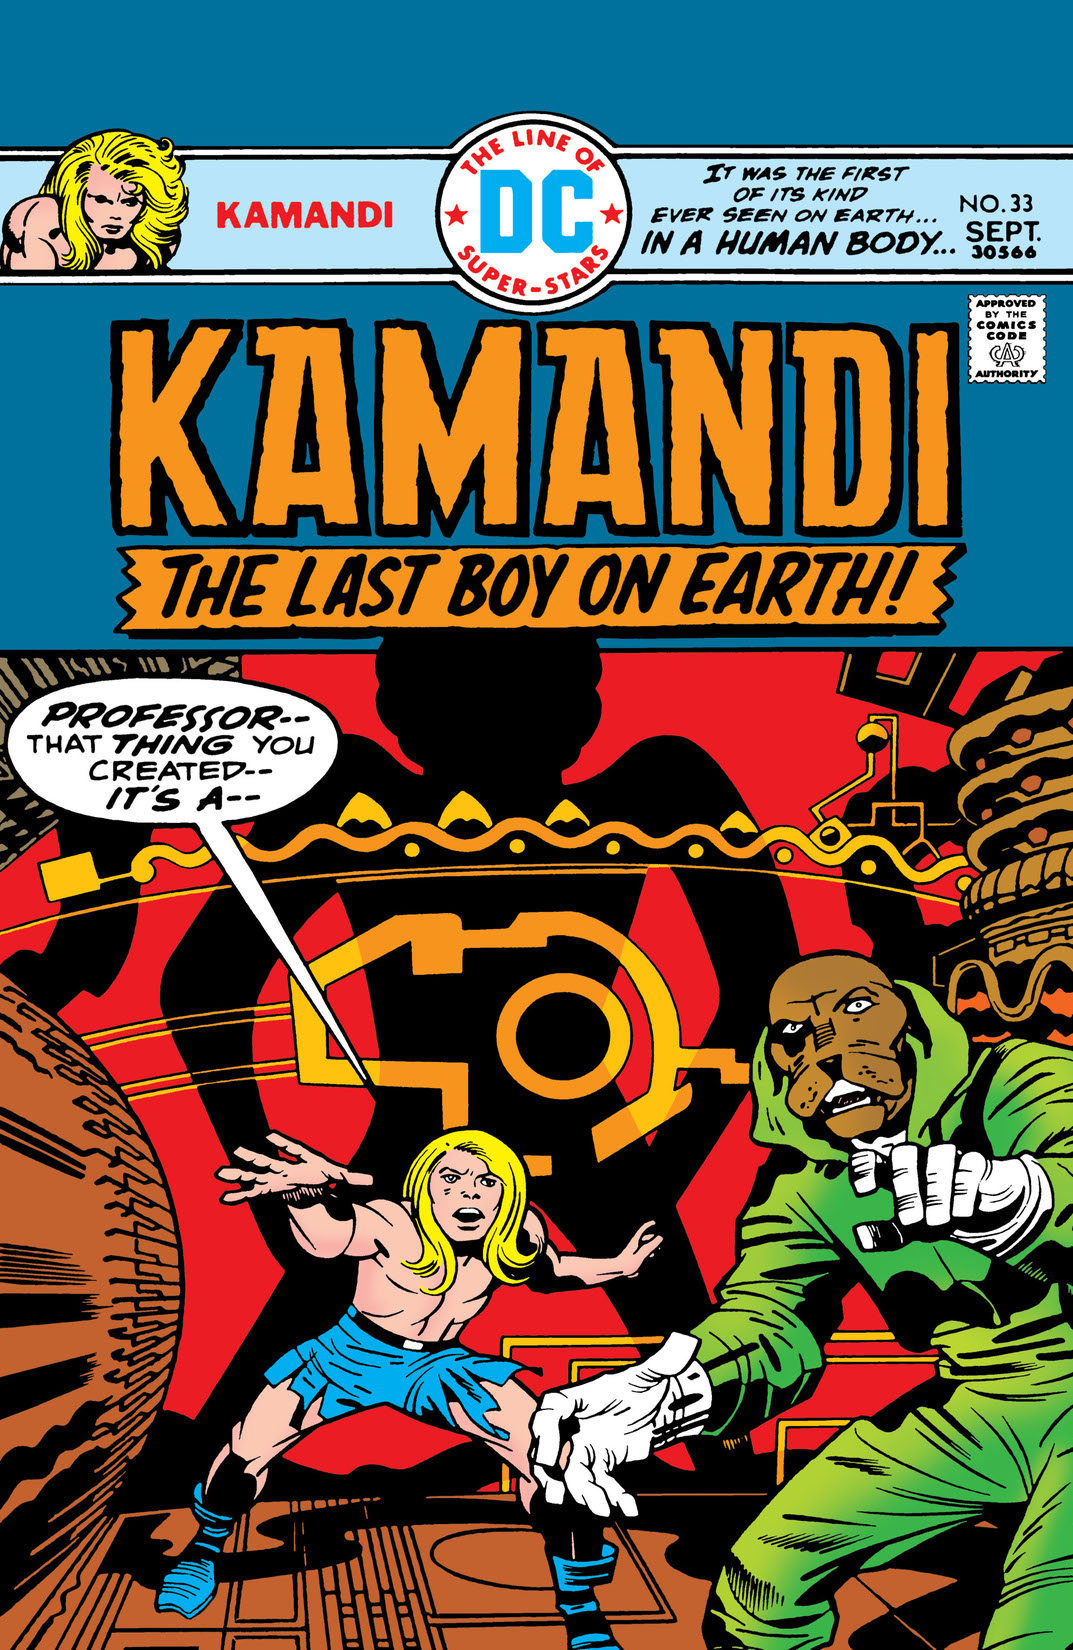 Kamandi: The Last Boy on Earth #33 preview images